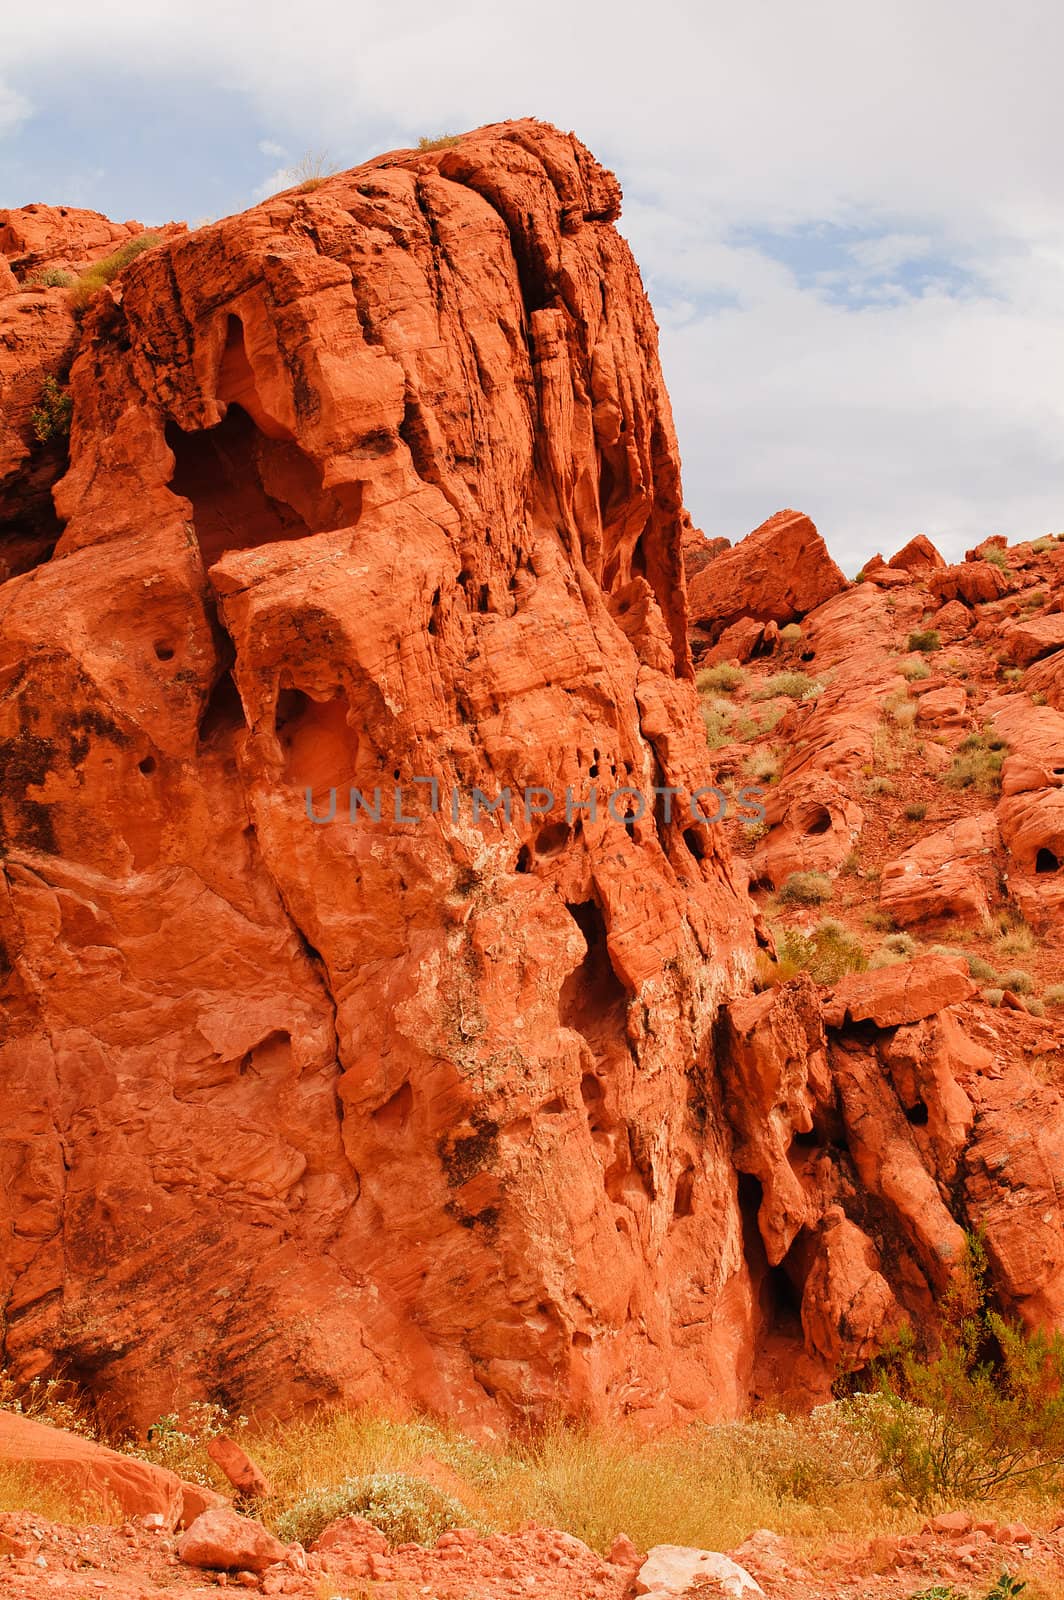 Scenic views of the State park "Valley of Fire" in Nevada